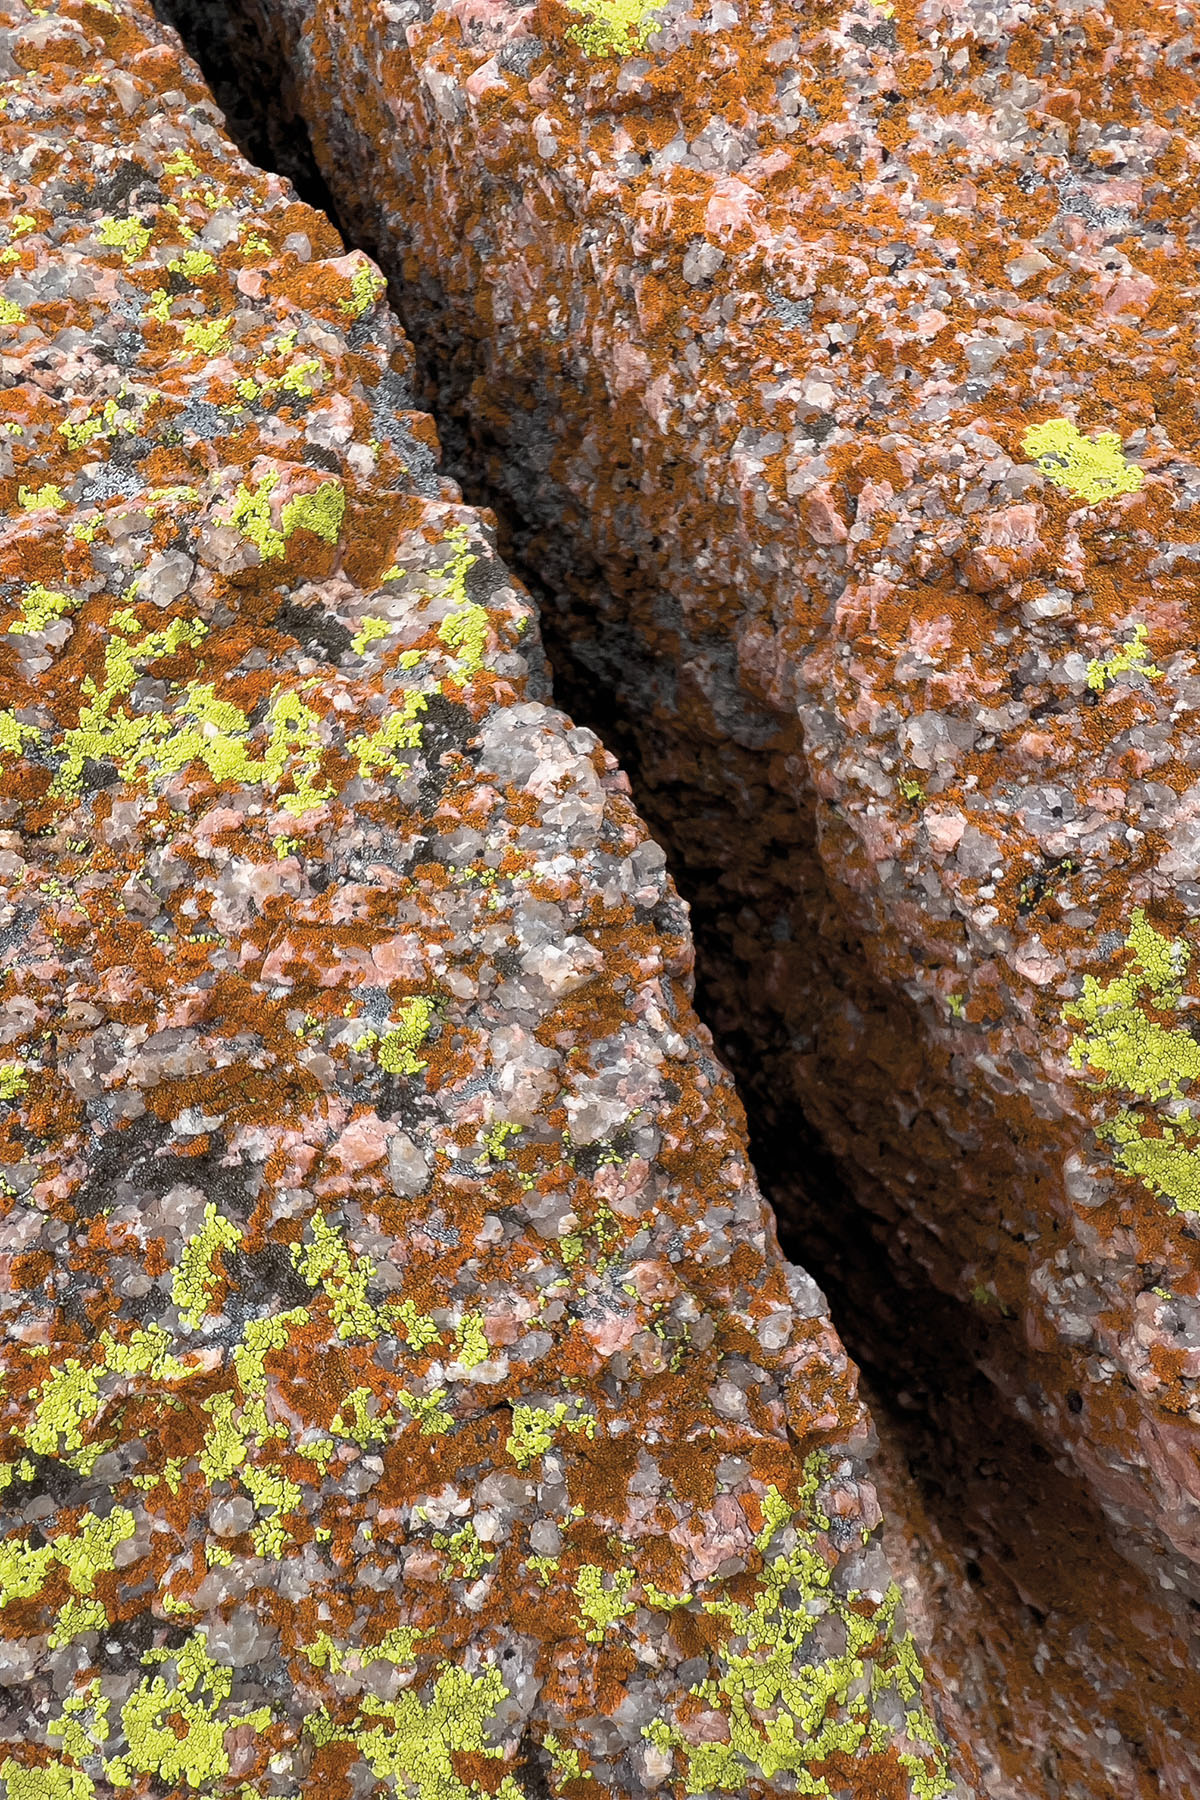 Small, patchy, green lichen covers a reddish gray stone